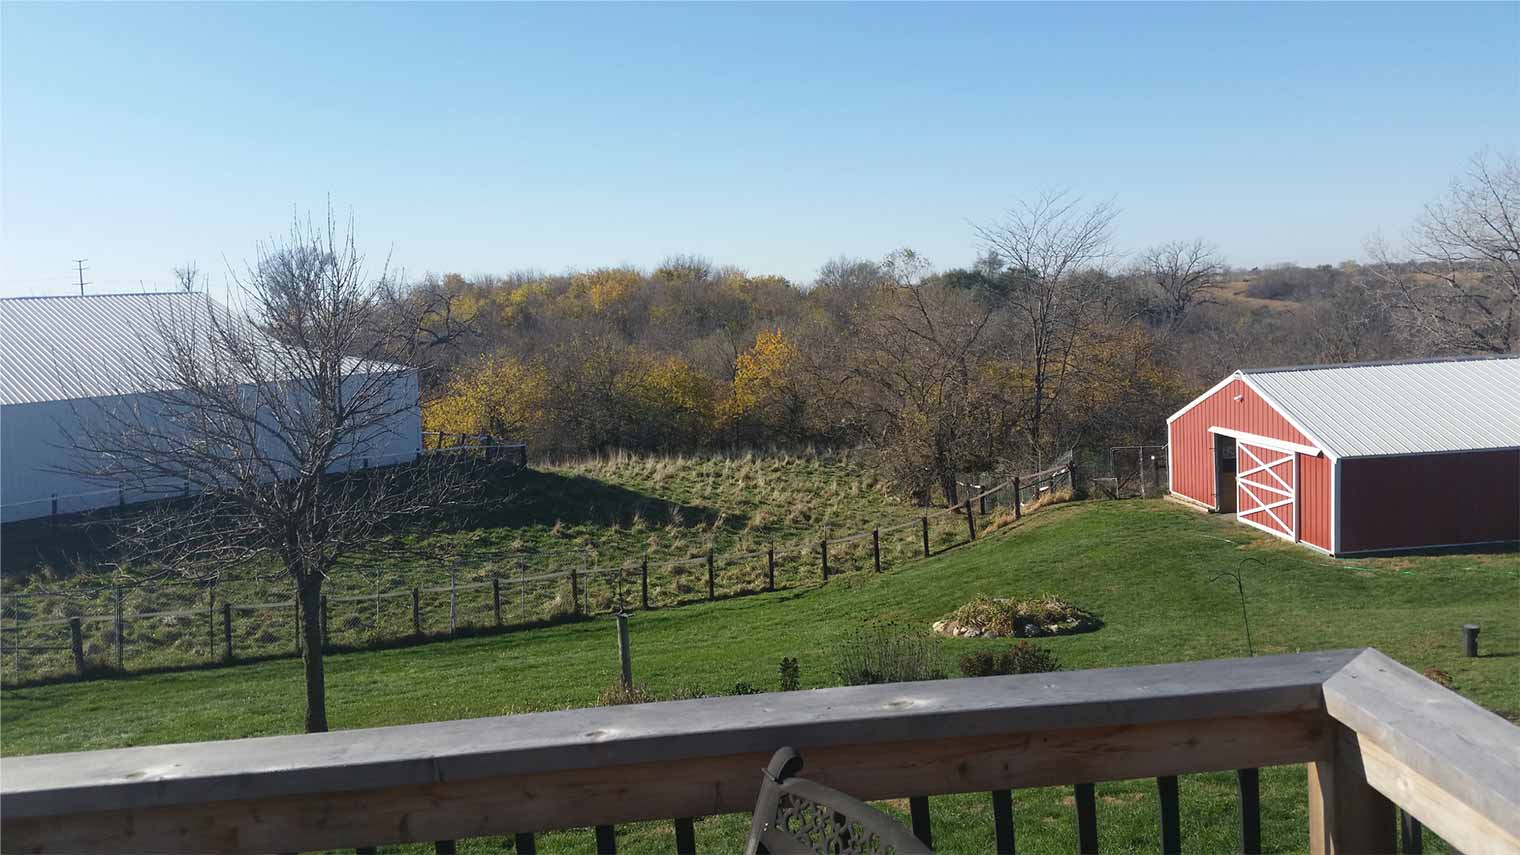 View of the farmland surrounding a house being remodeled by Silent Rivers of Des Moines